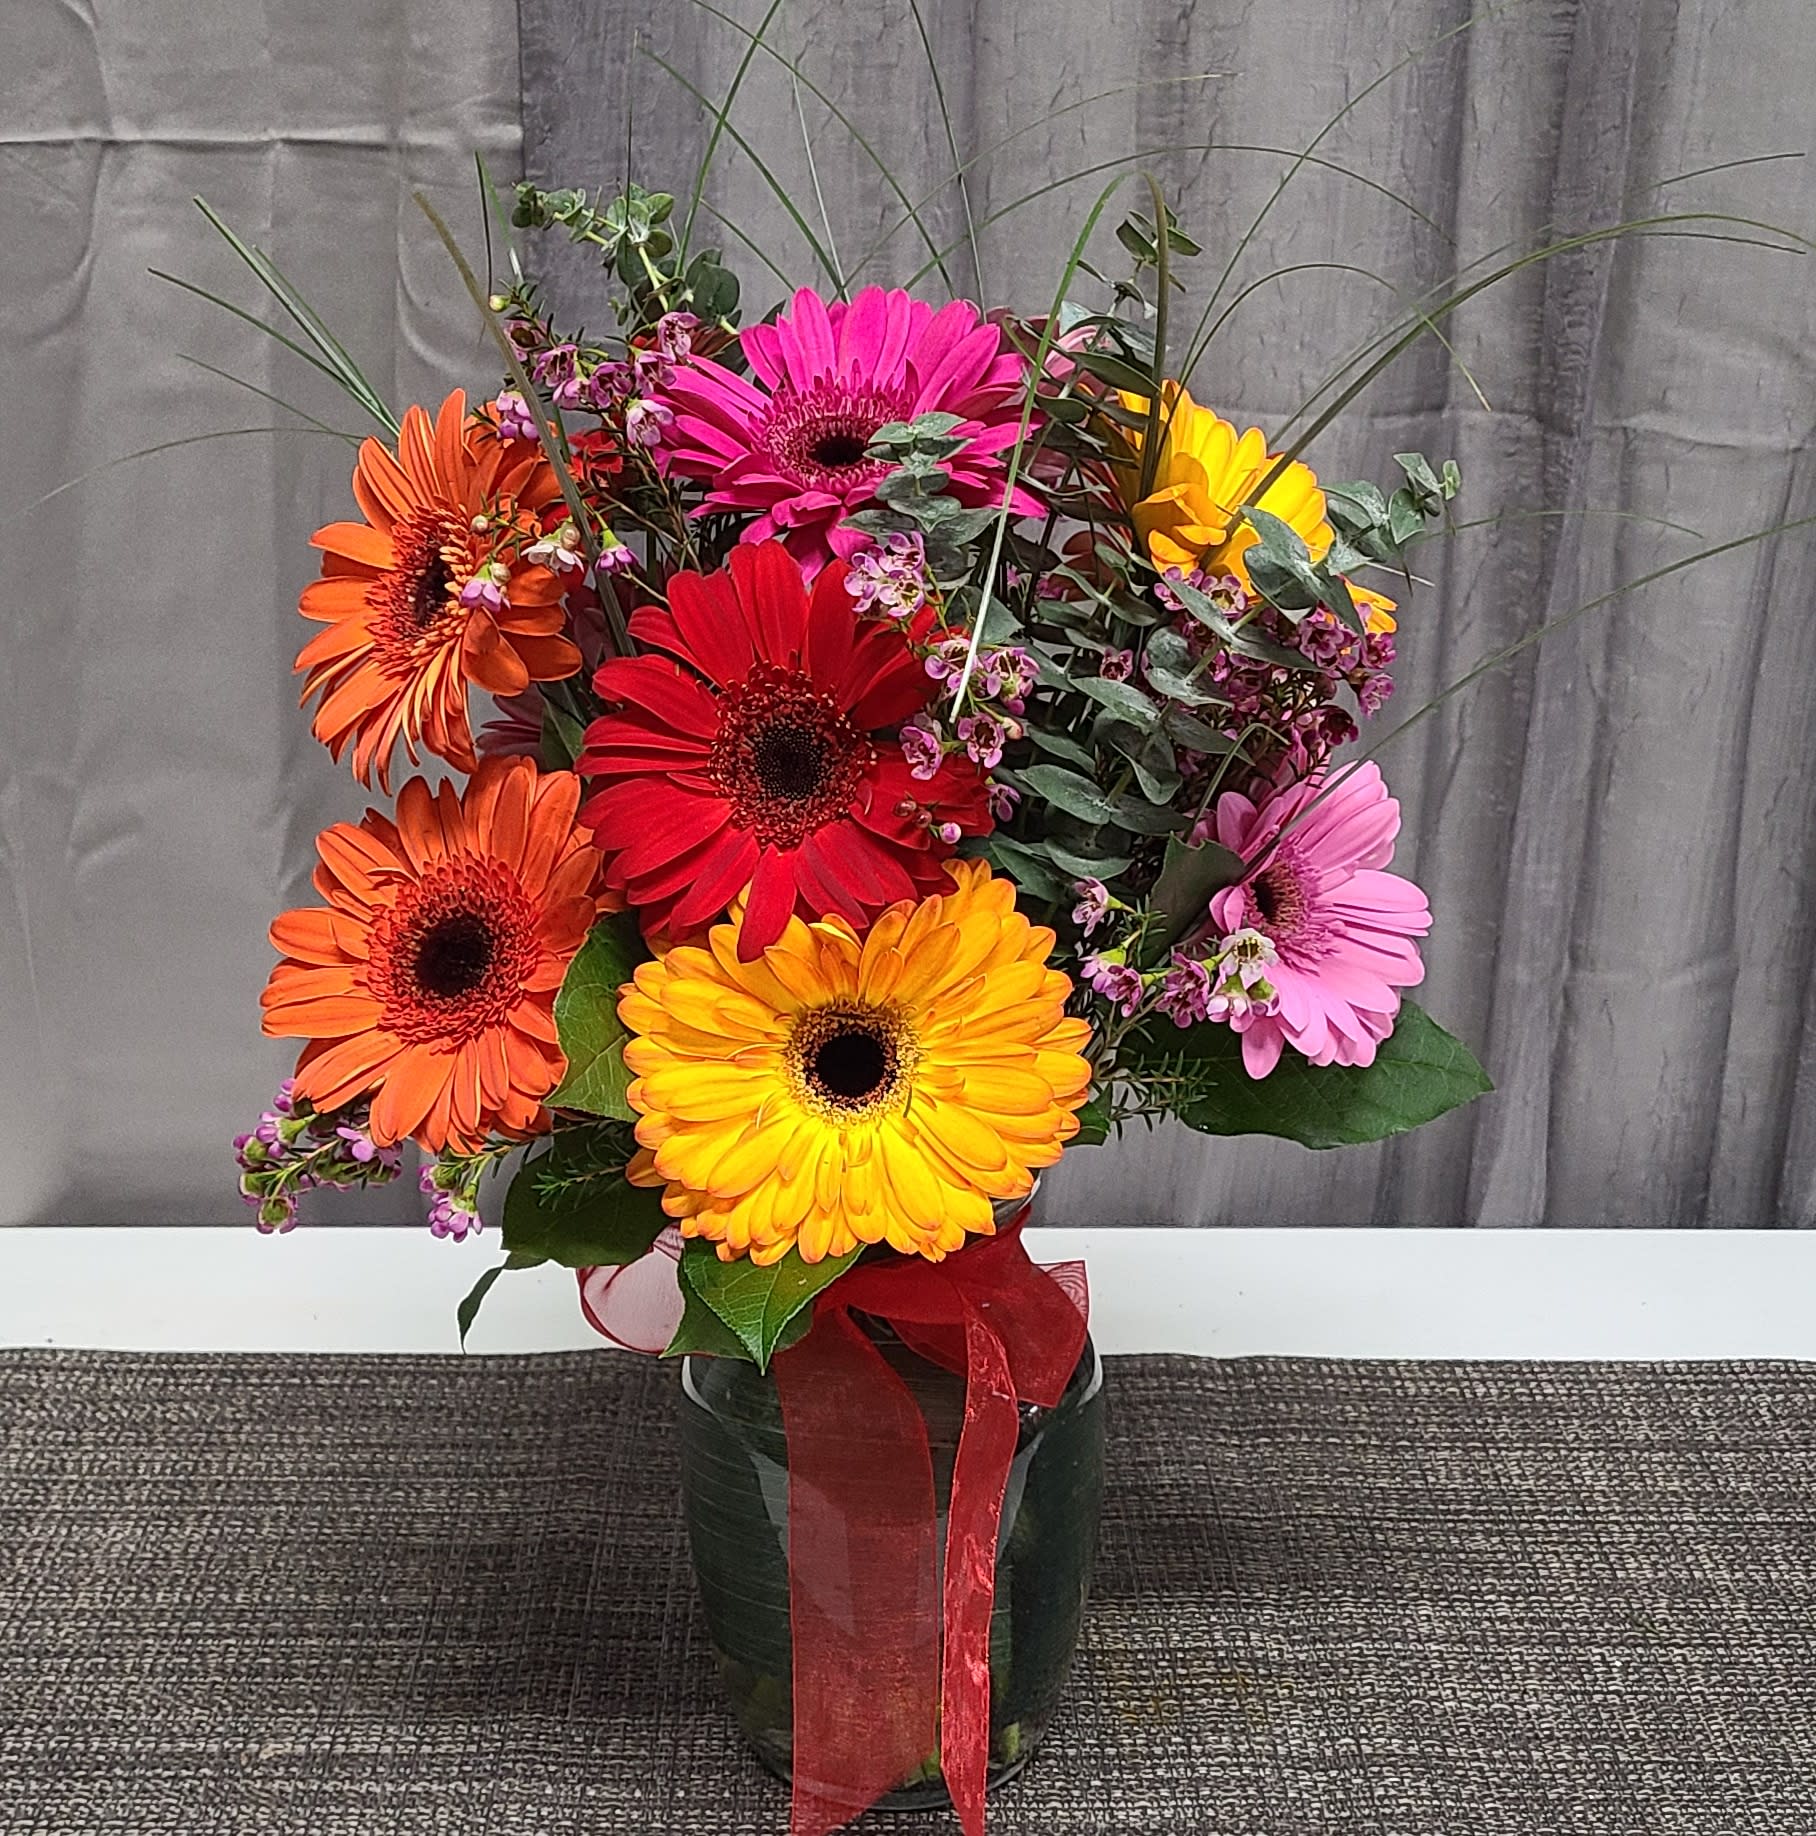 Daisies a plenty  - Colorful gerbera daisies with beautiful green filler